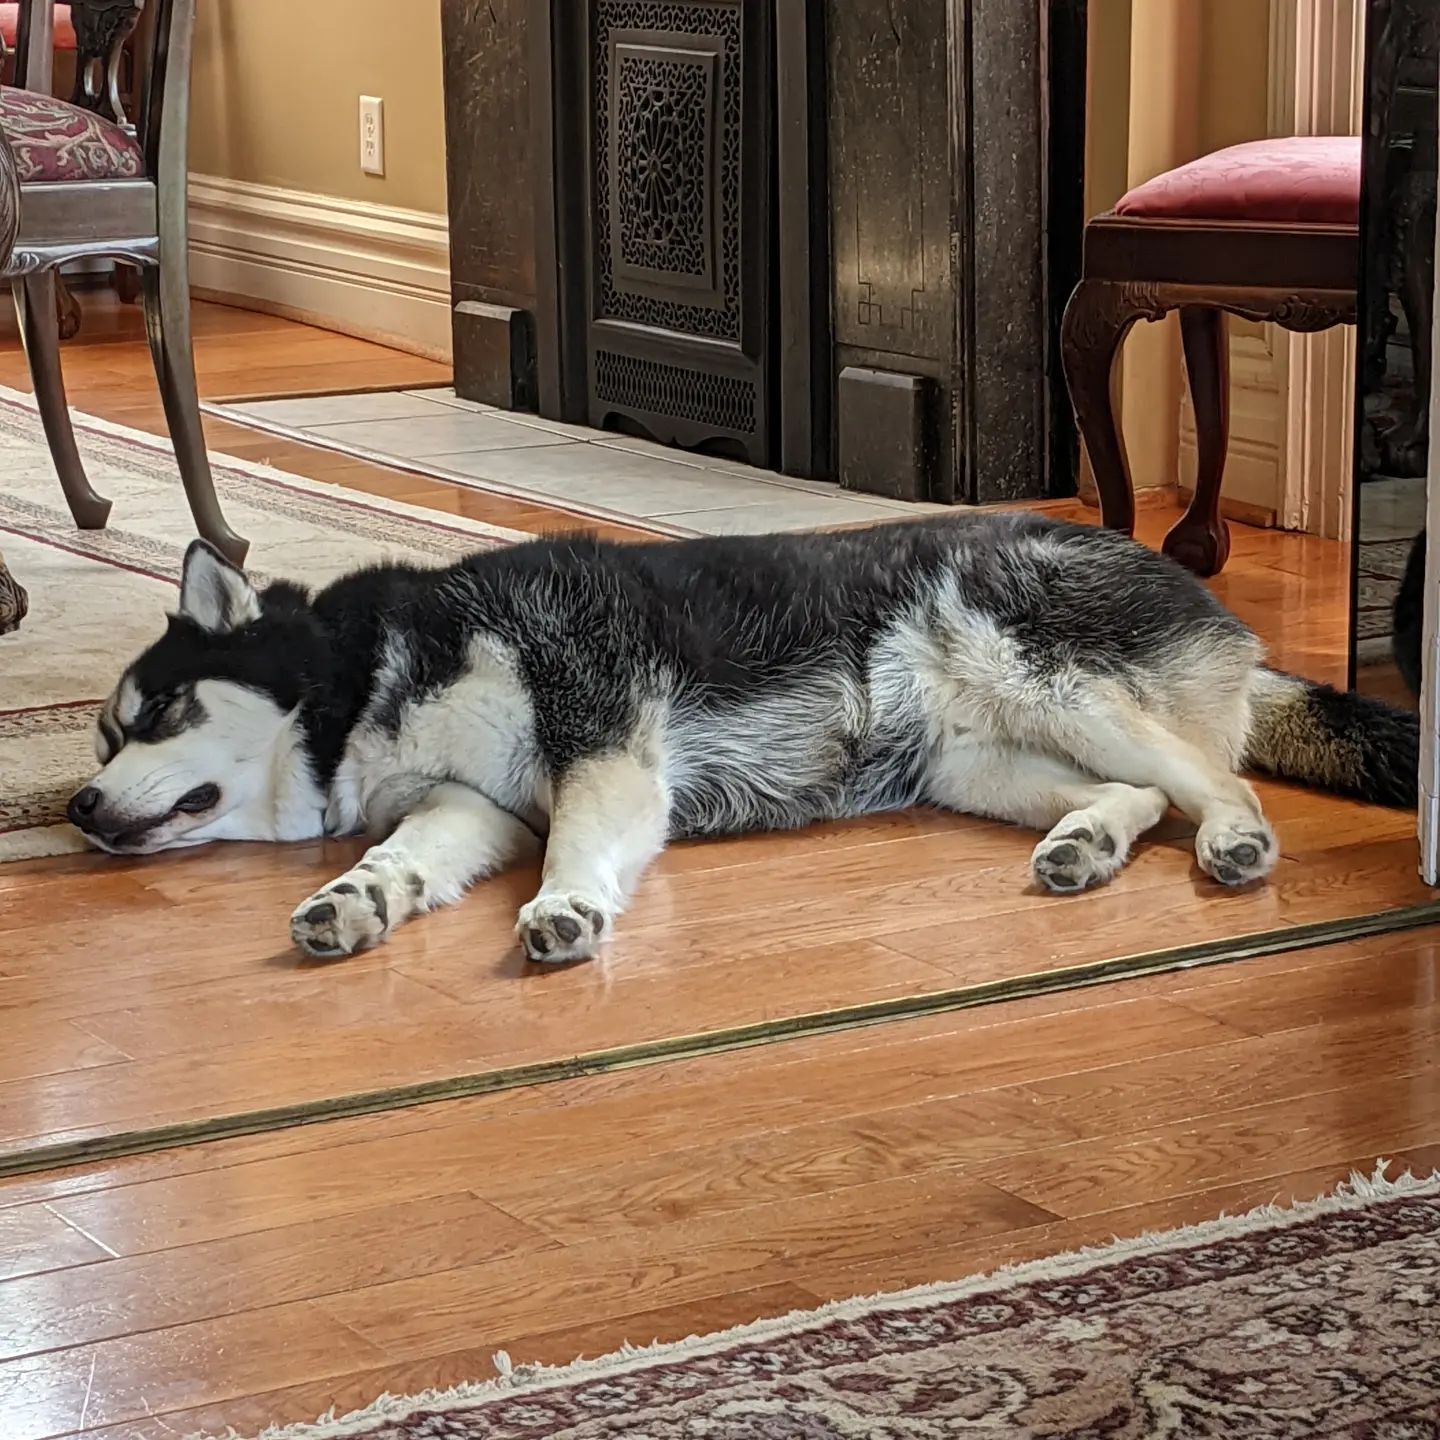 A tired husky is a happy husky #stlnanuq #siberianhusky #huskiesofinstagram You really do have to walk these guys a lot to keep them happy lol